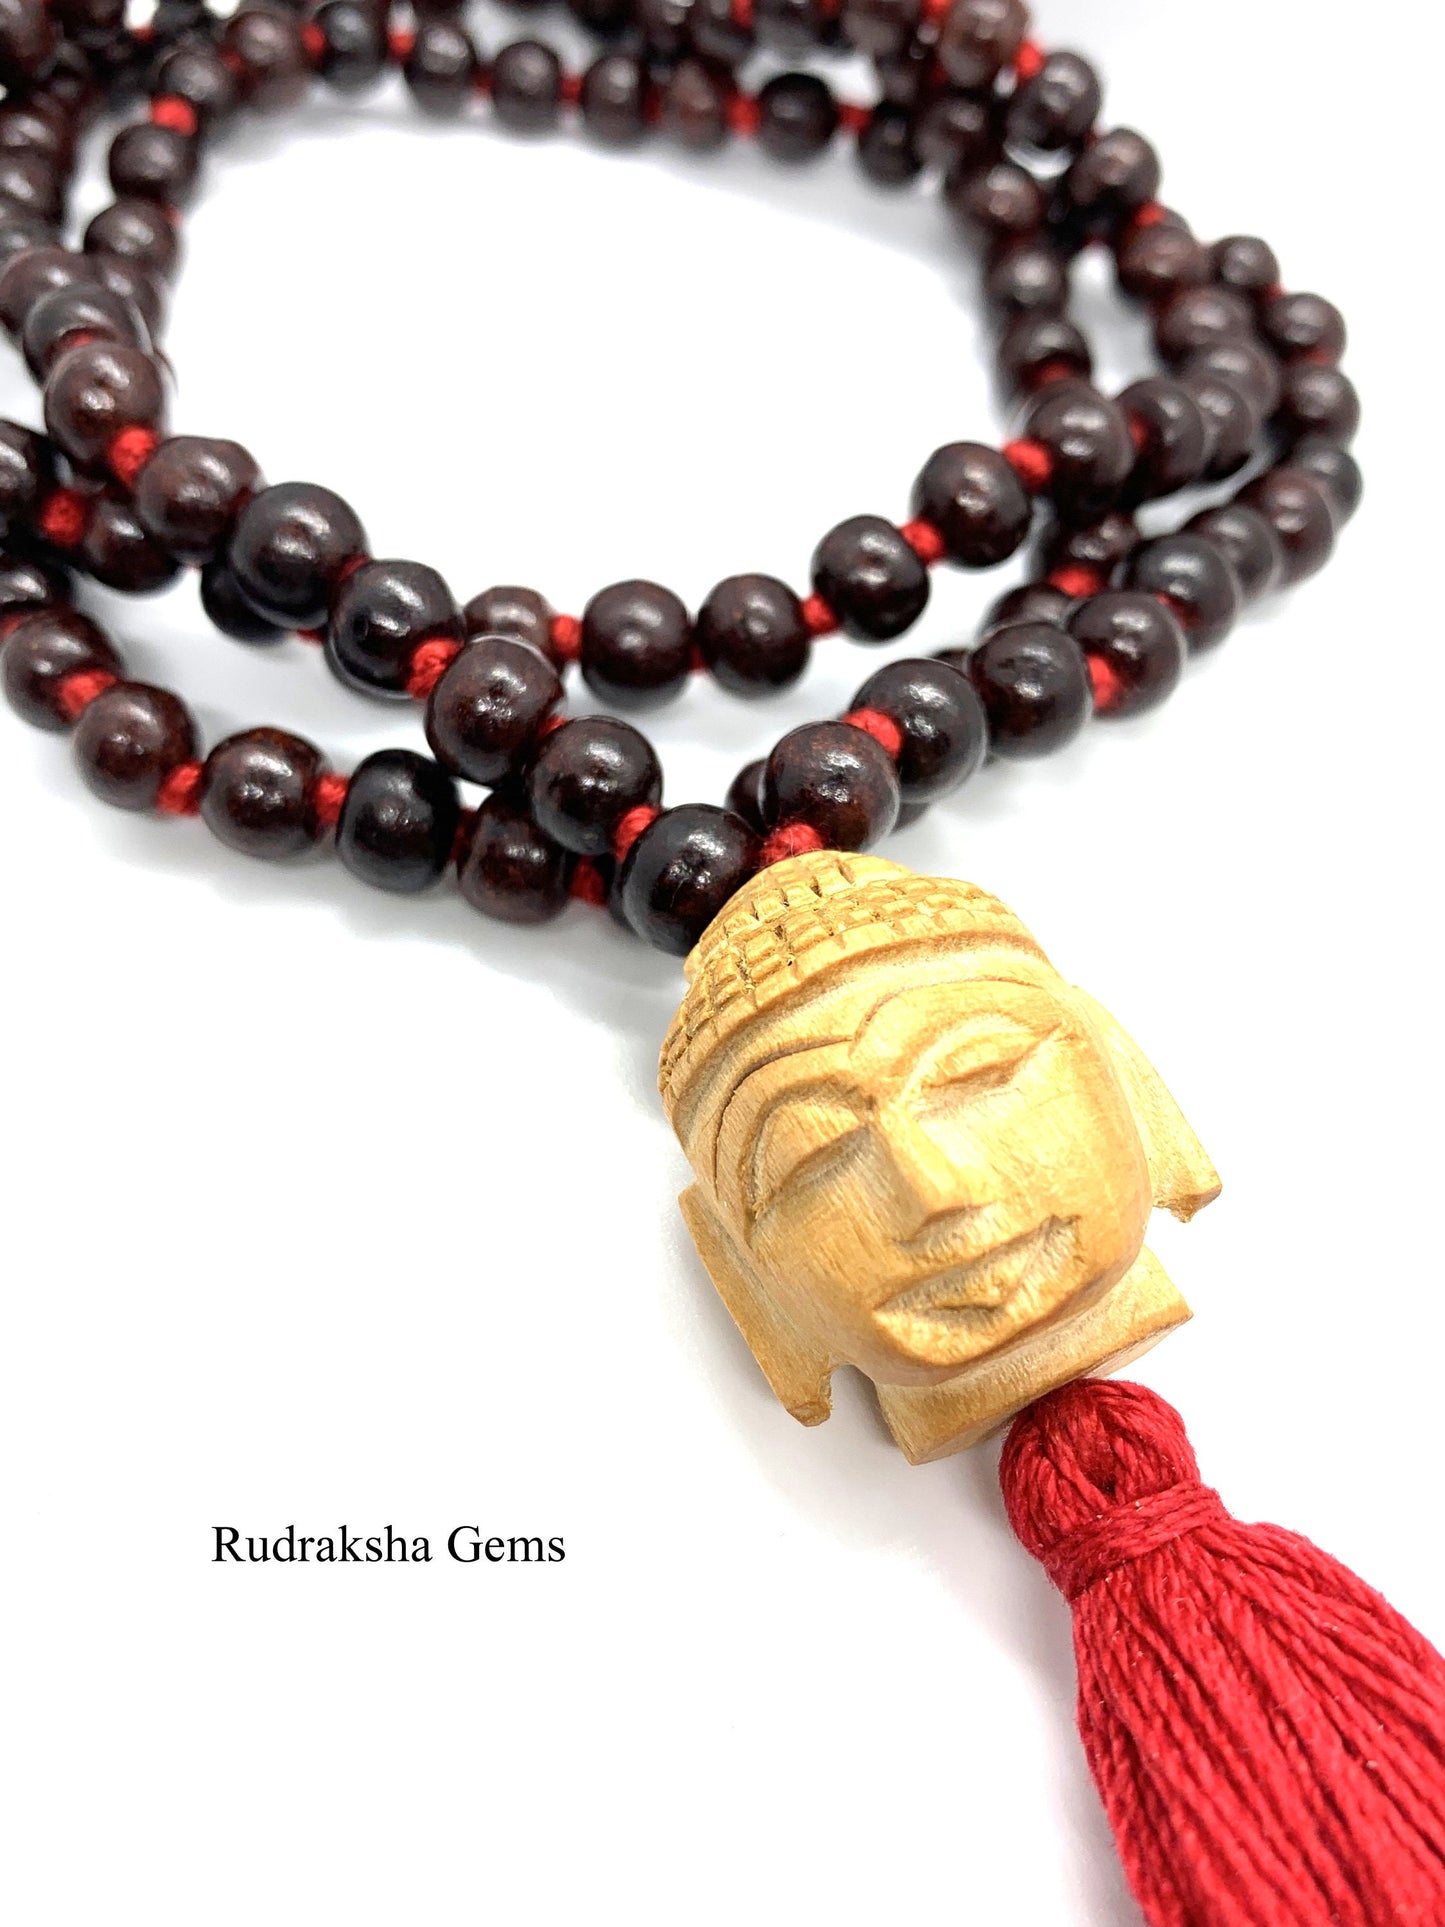 Buddha Classic 108 Knotted Meditation Mala | 8mm Indian Rosewood with Red / Cotton String Tassel | Elegant Natural Design | Yoga Necklace